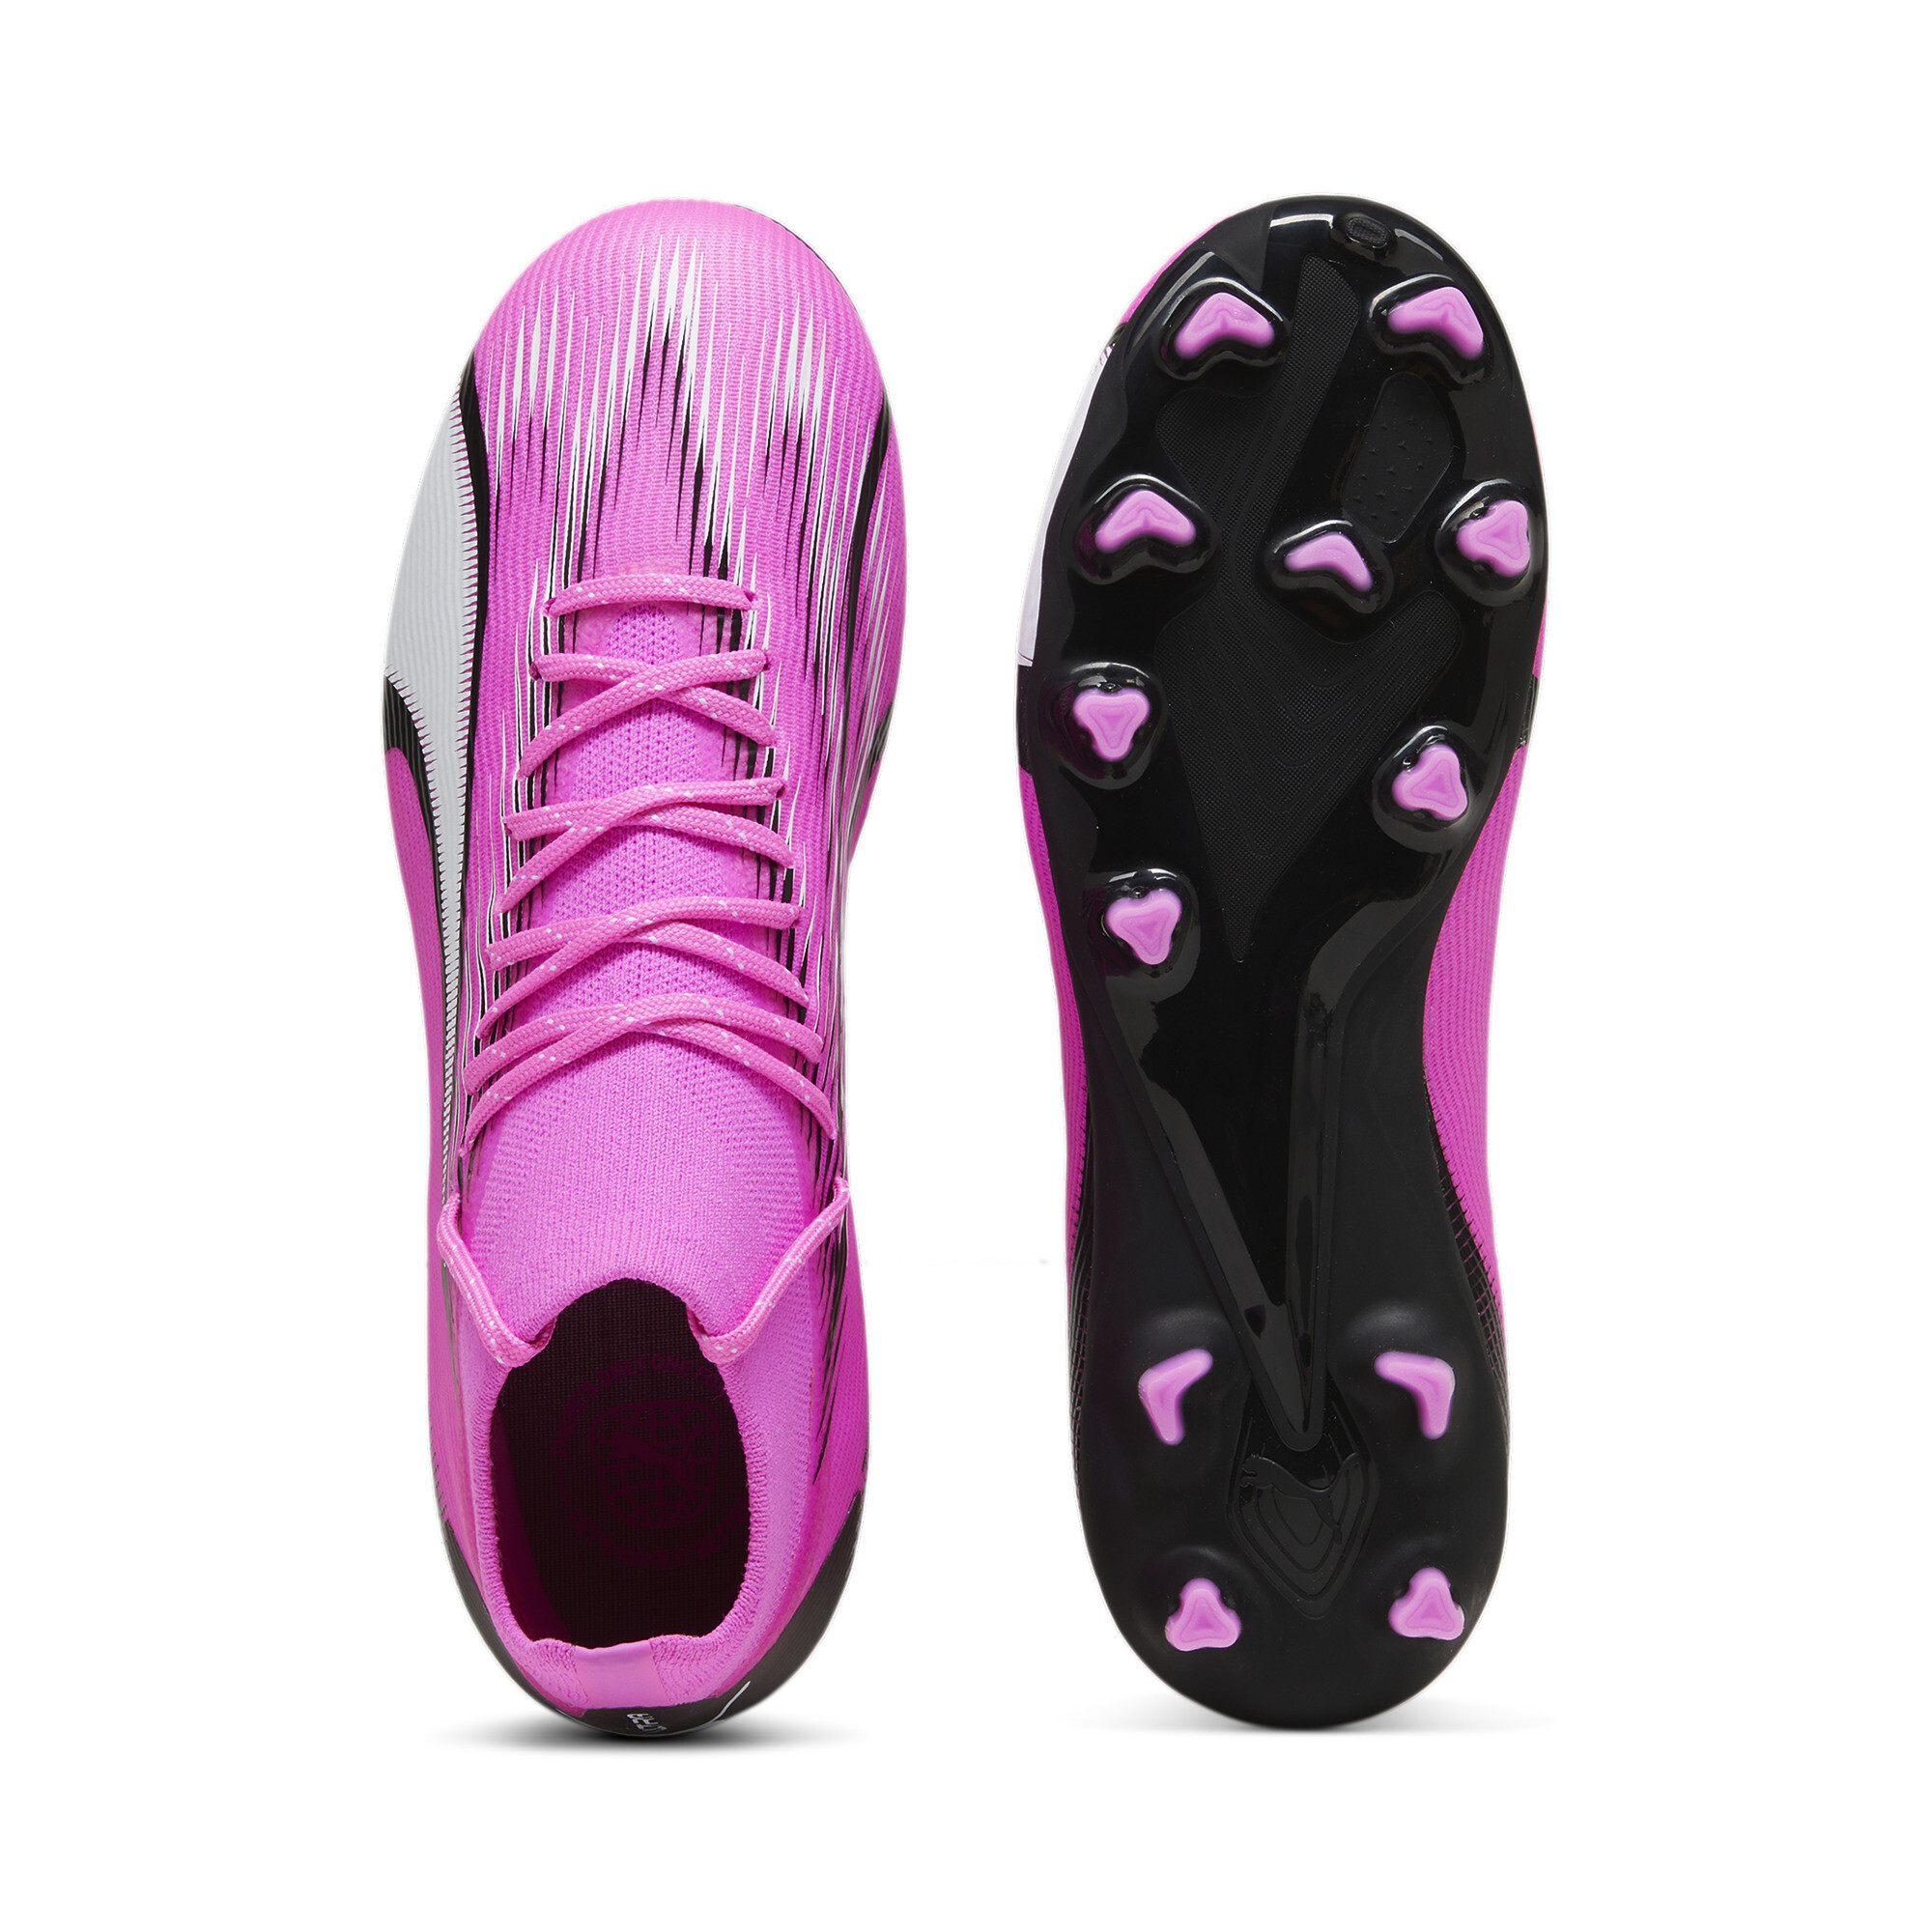 Puma ULTRA PRO FG/AG Youth Football Boots, Pink, Size 28, Shoes